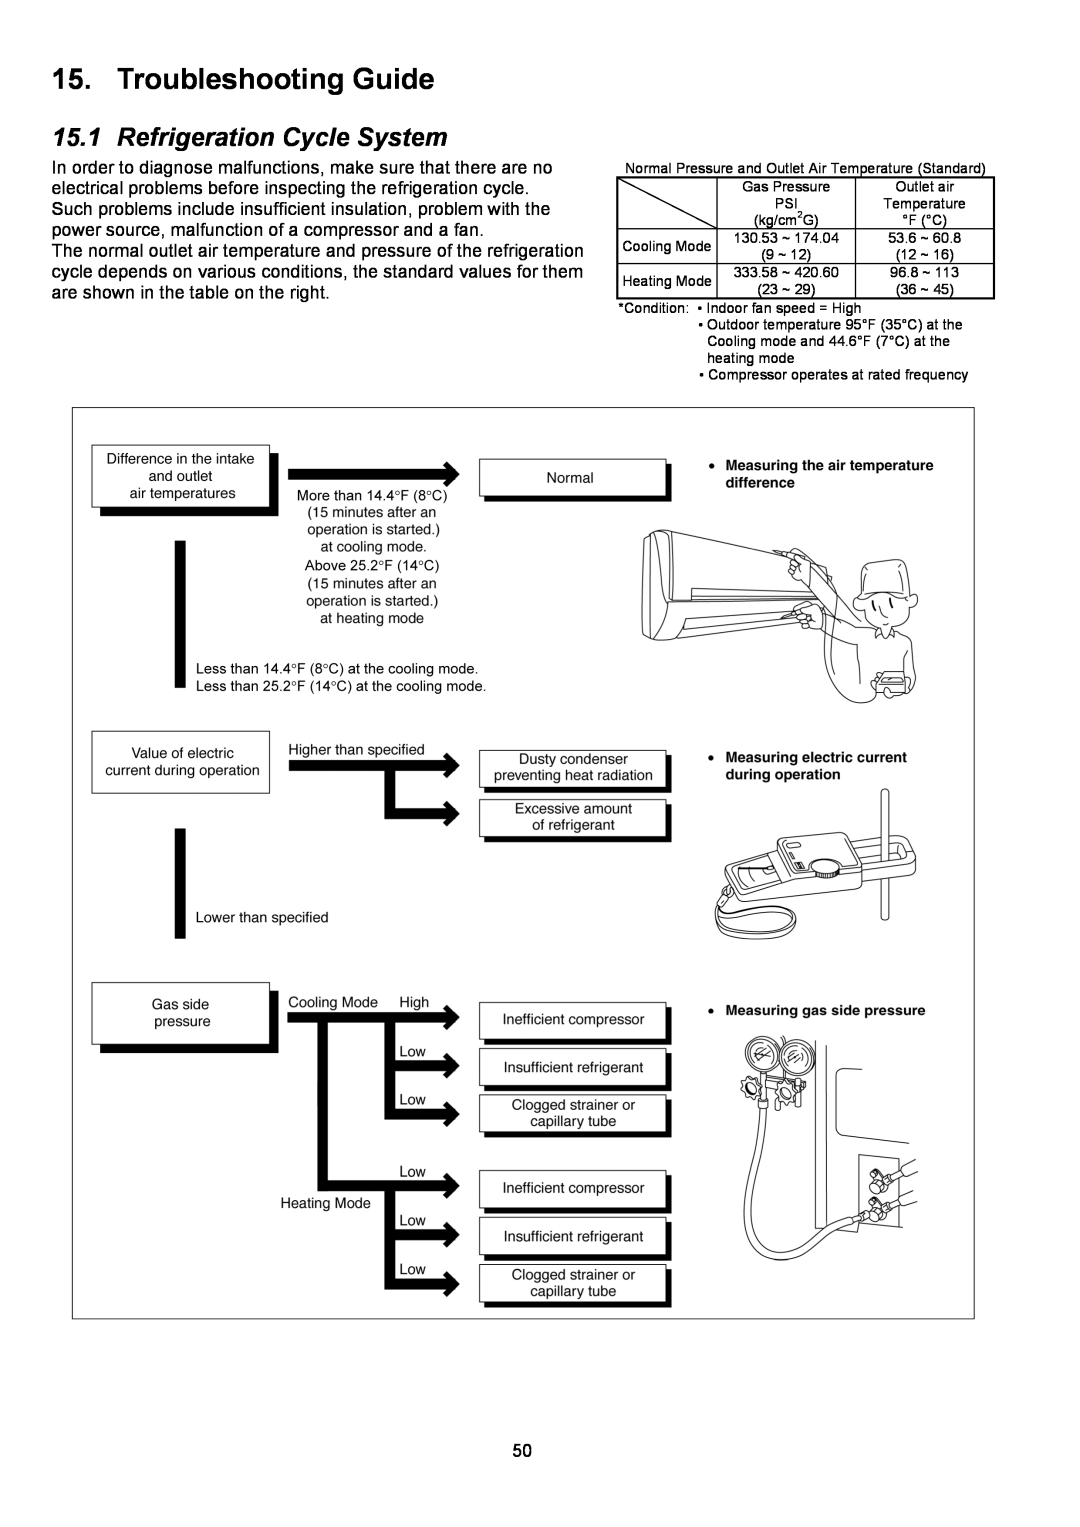 Panasonic CU-XE9PKUA, CS-XE12PKUA, CS-XE9PKUA, CU-XE12PKUA manual Troubleshooting Guide, Refrigeration Cycle System 